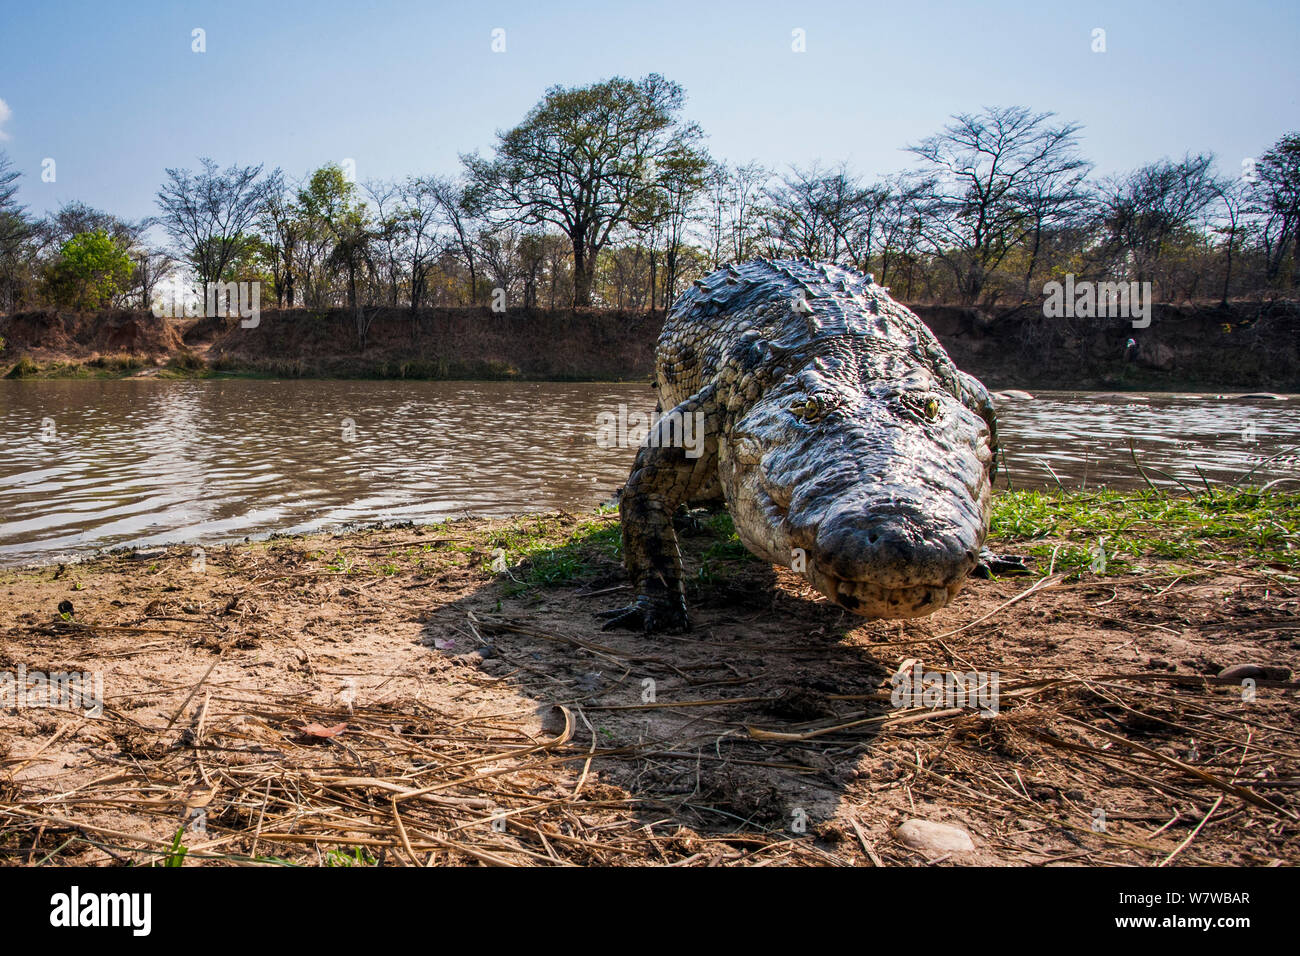 Nile Crocodile (Crocodylus niloticus) basking on shores of lagoon, South Luangwa National Park, Zambia. Photographed with a remote camera. Stock Photo